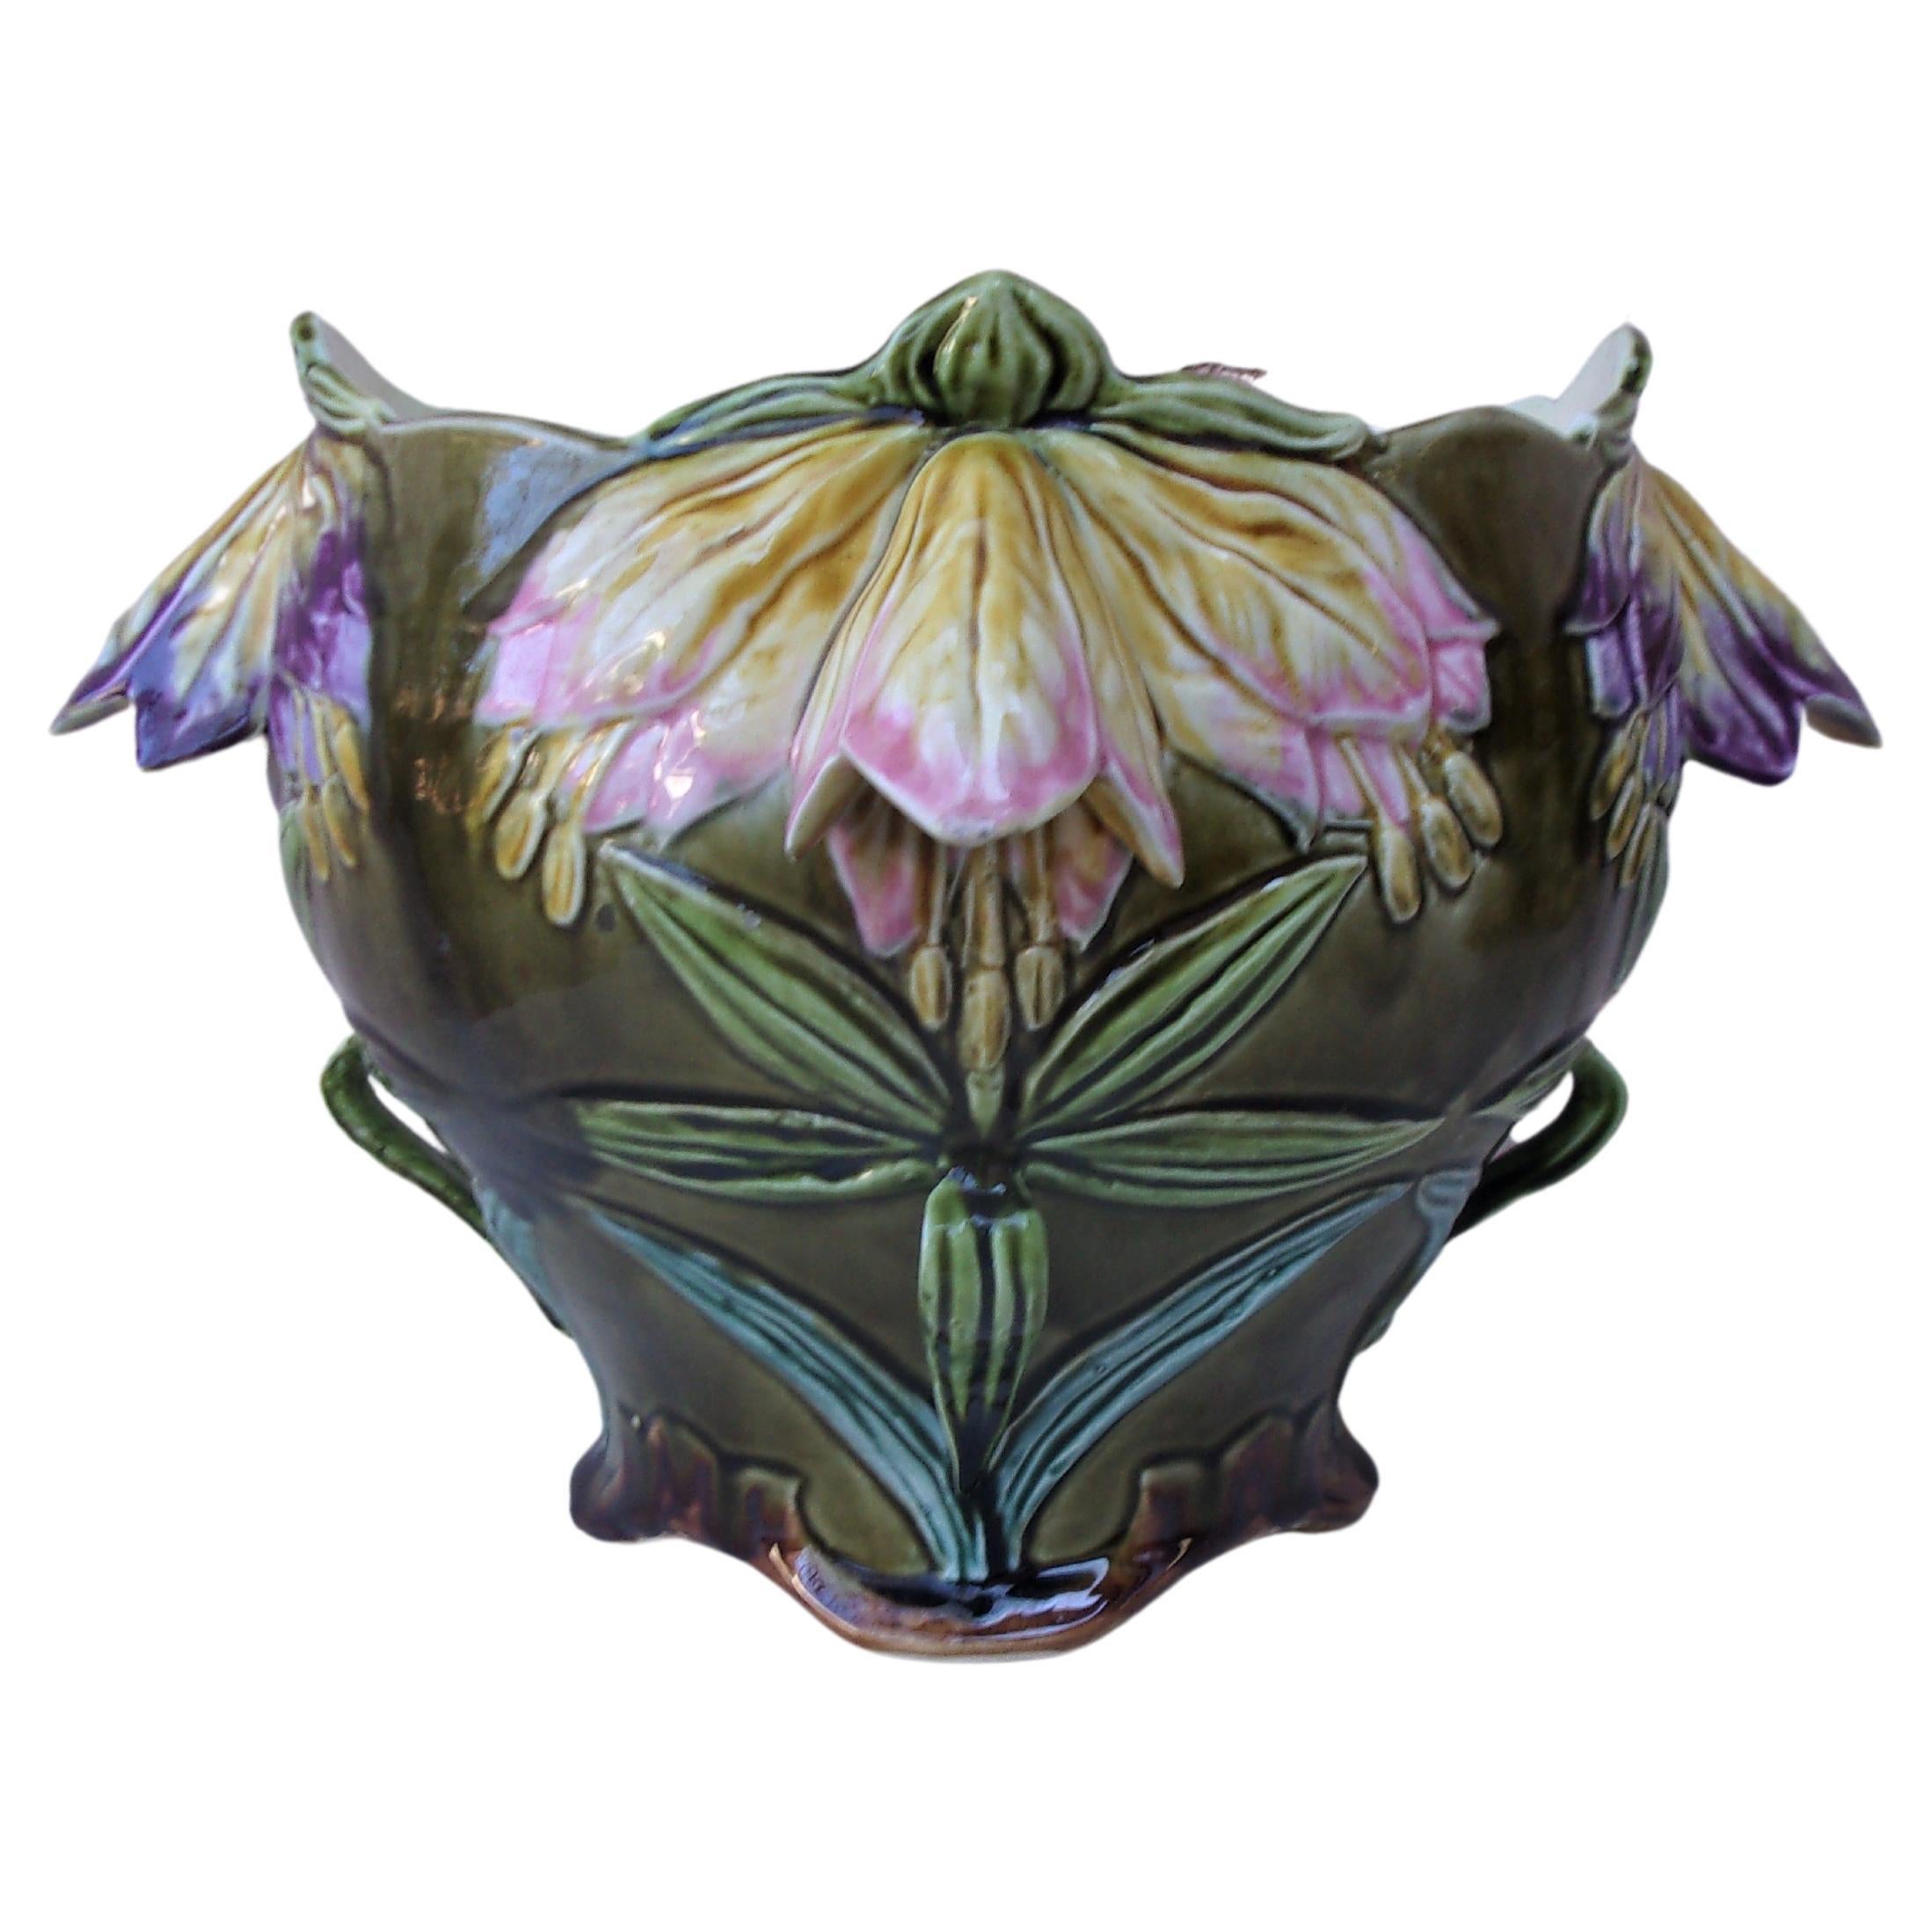 French Majolica Jardiniere Fives Lille Circa 1890.
Lovely and rare jardiniere, the two sides have differents flowers colors purple and pink.
Art Nouveau period.